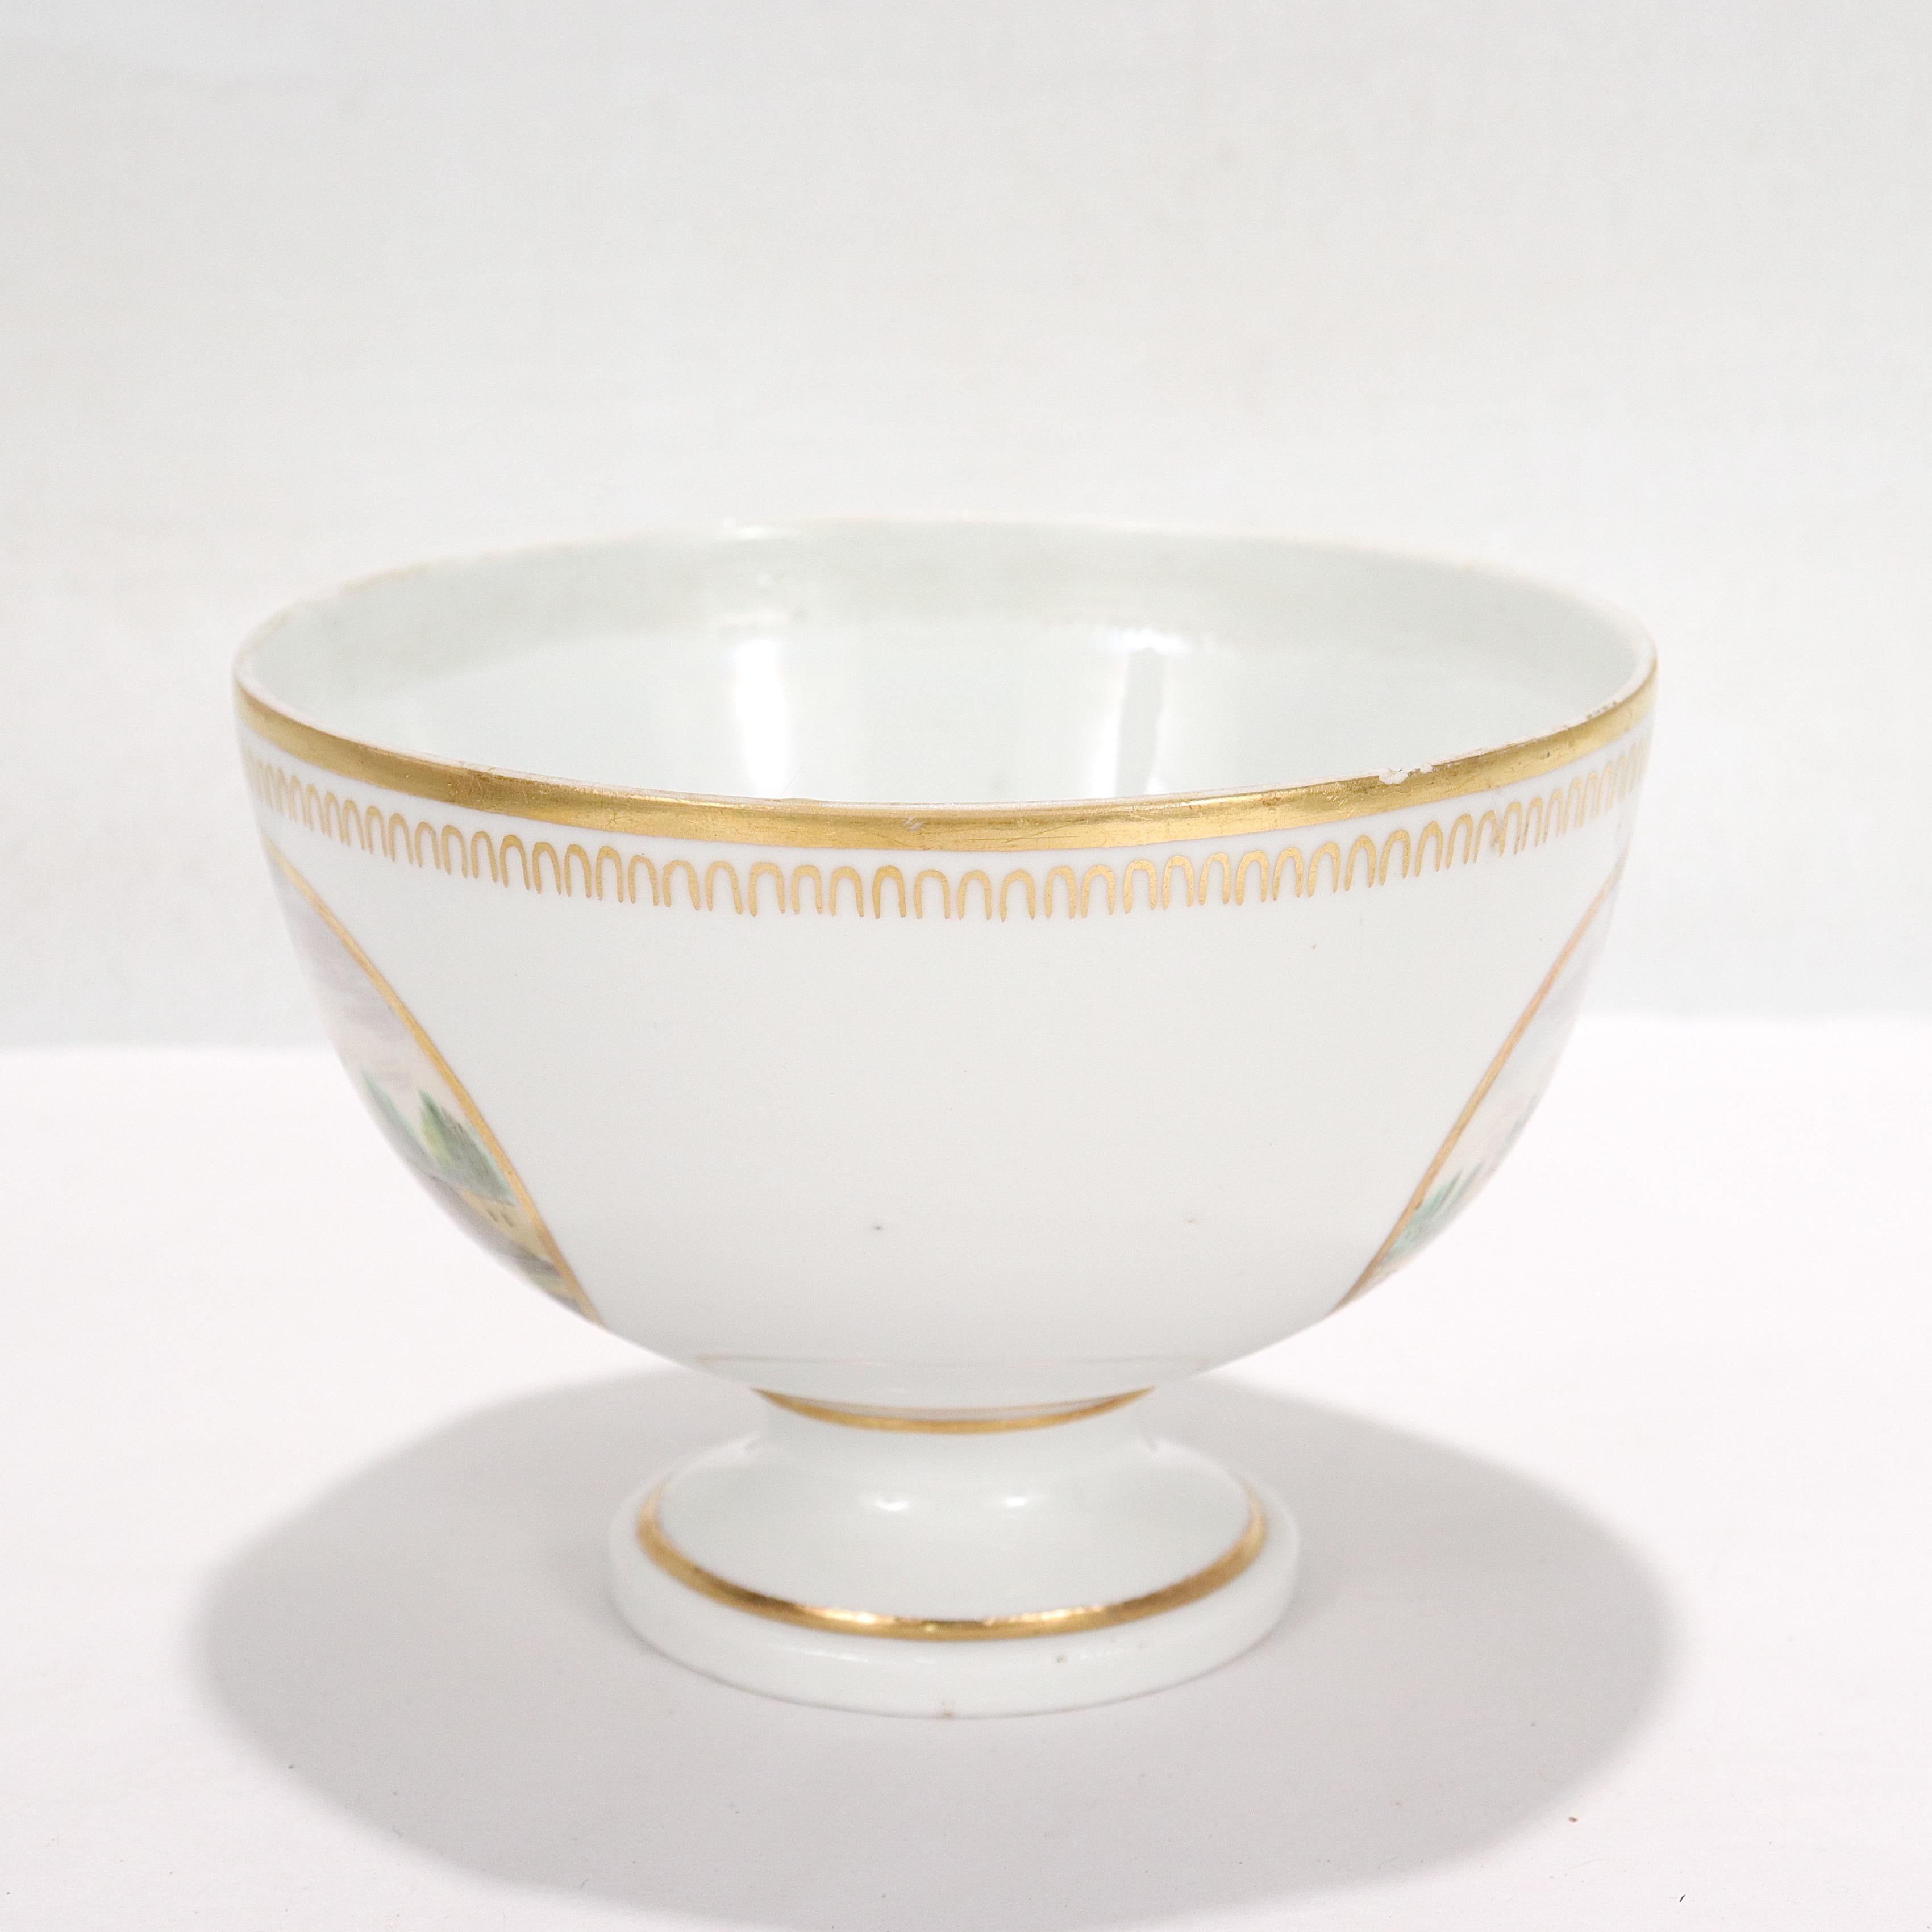 Painted Antique Doccia Porcelain Italian Neoclassical Topographical Waste Bowl For Sale